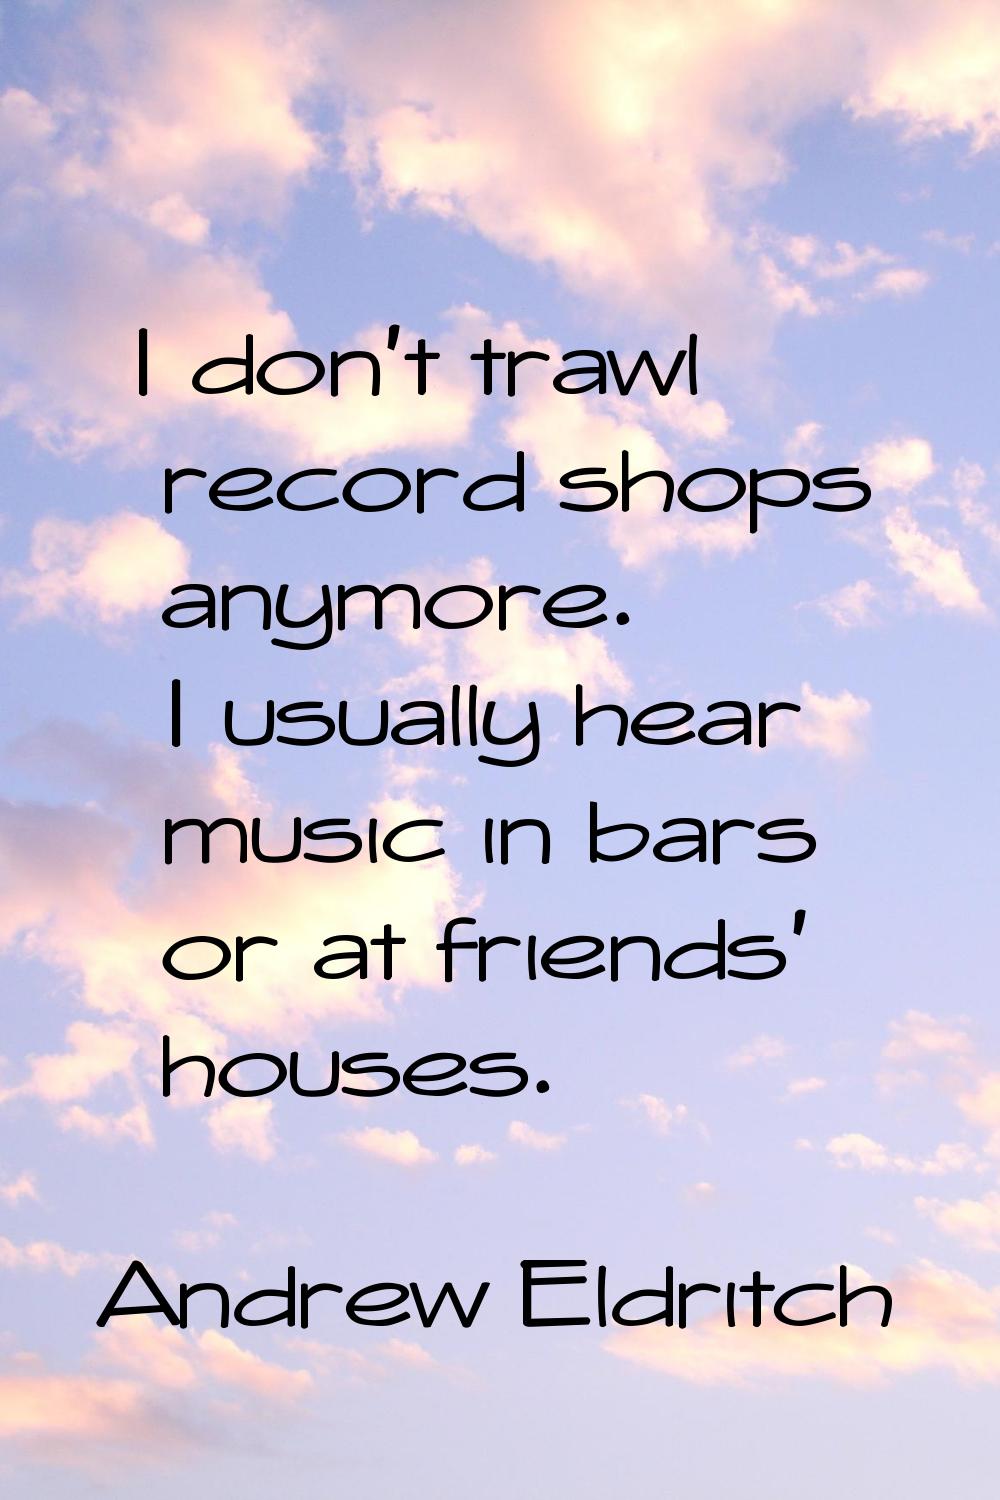 I don't trawl record shops anymore. I usually hear music in bars or at friends' houses.